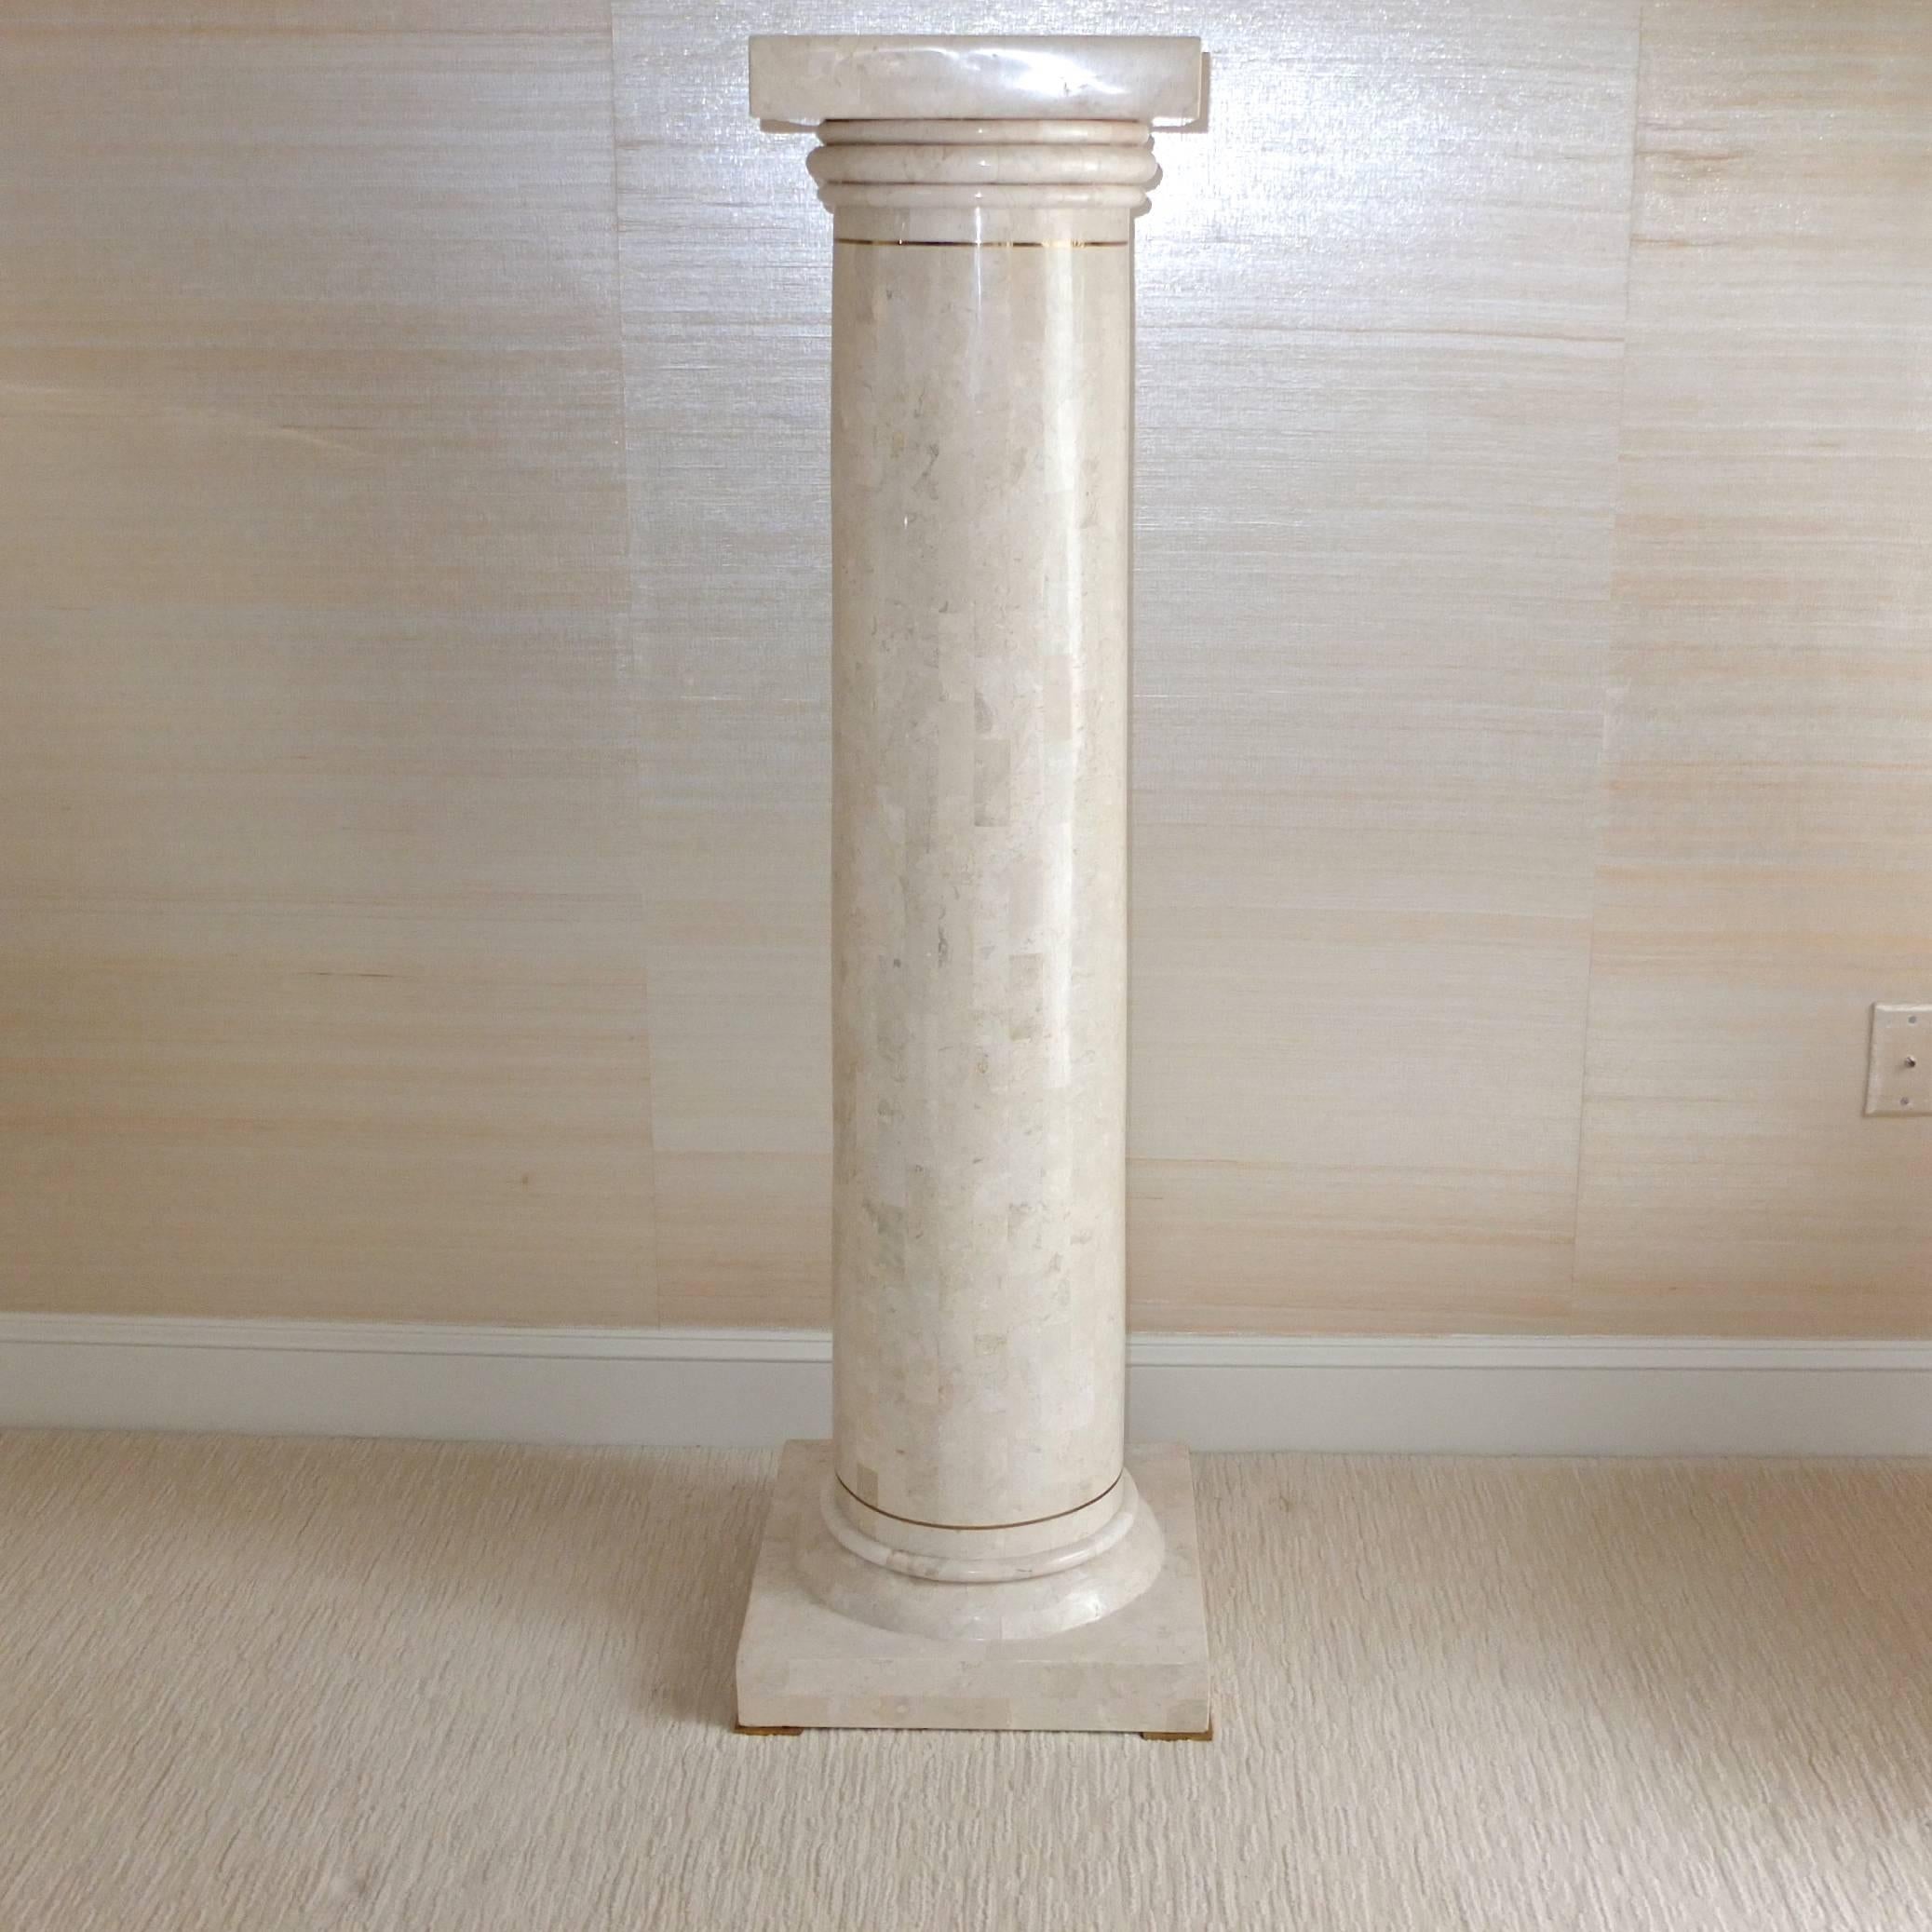 Maitland Smith Doric column with square plinth and base made of tessellated fossil stone with brass inlay and feet. Excellent condition.

Top is 12-3/4 inches square.

Solid heavy construction. Can definitely support something with